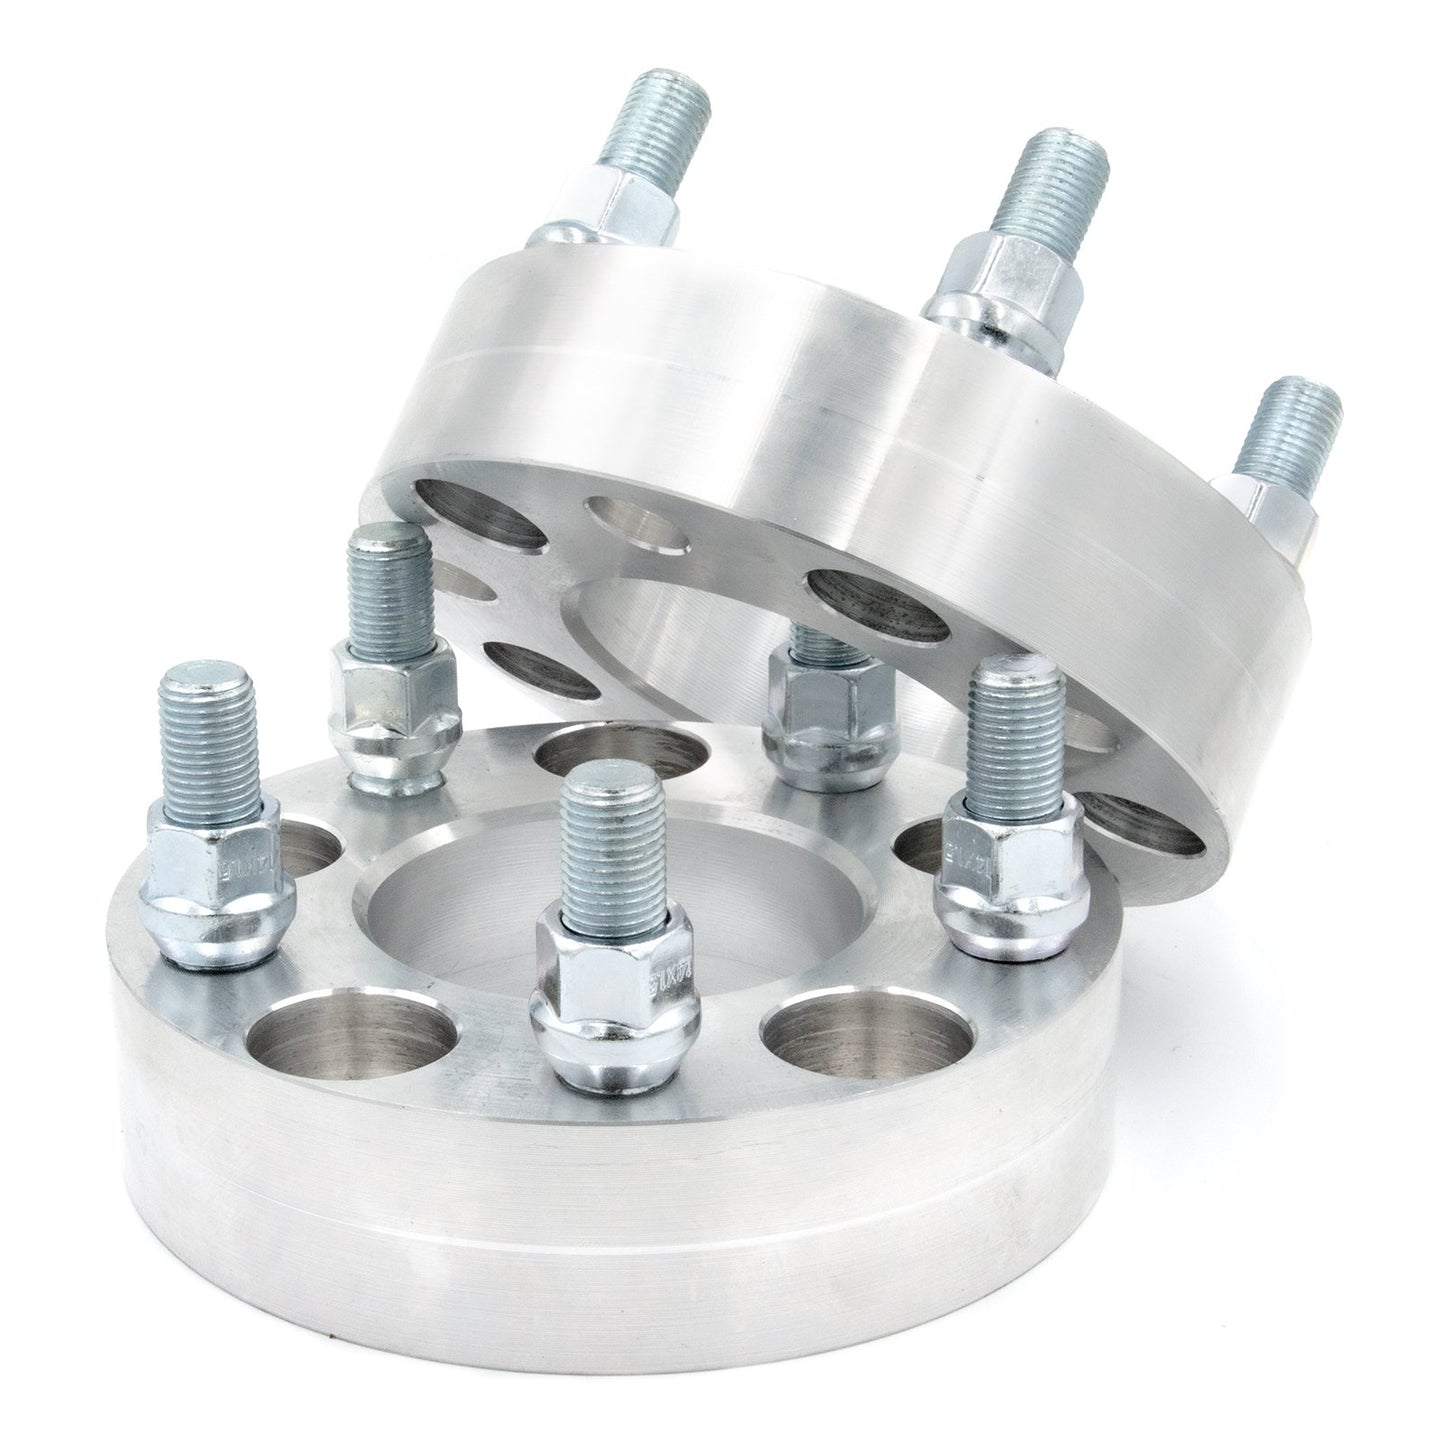 5x150 to 5x150 Wheel Spacer/Adapter - Thickness: 3/4"- 4"